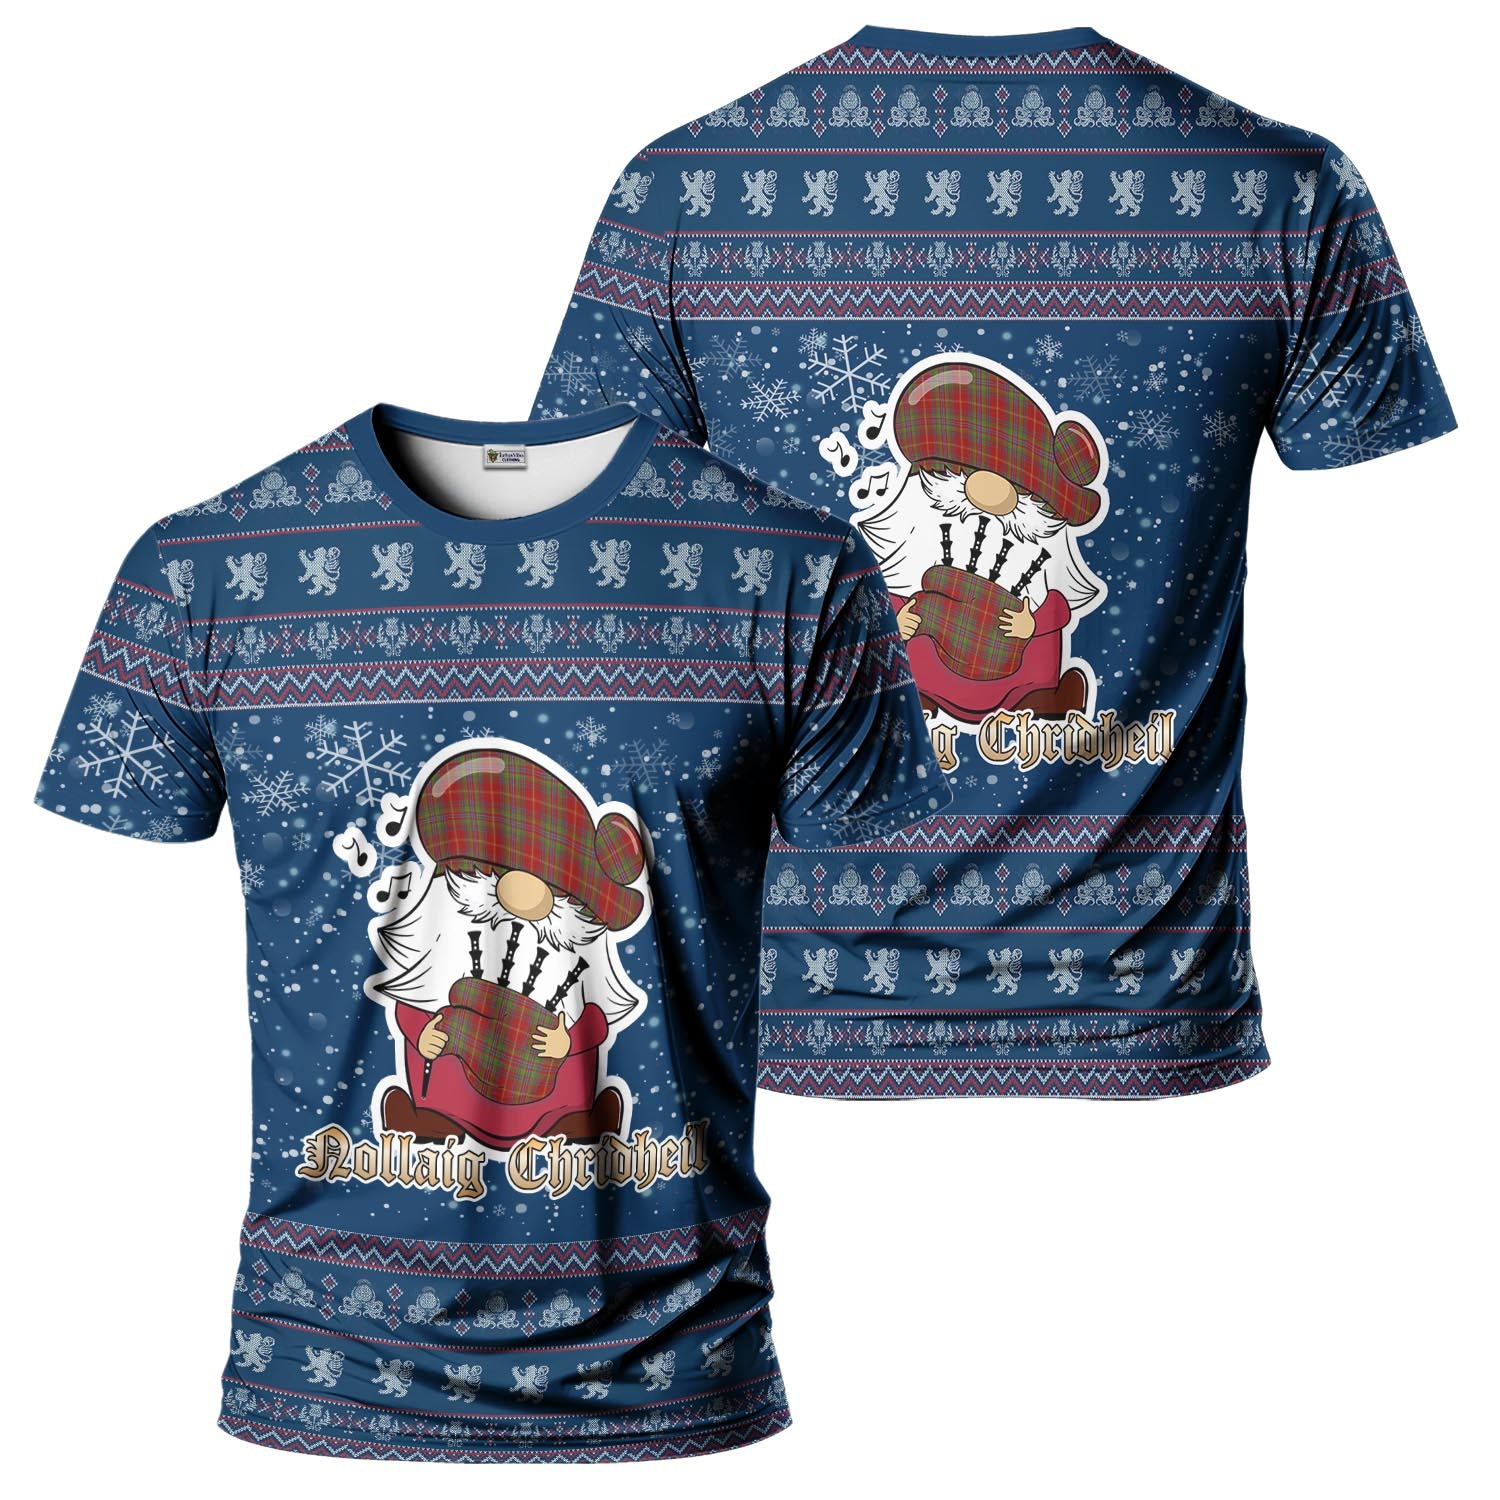 Wren Clan Christmas Family T-Shirt with Funny Gnome Playing Bagpipes Kid's Shirt Blue - Tartanvibesclothing